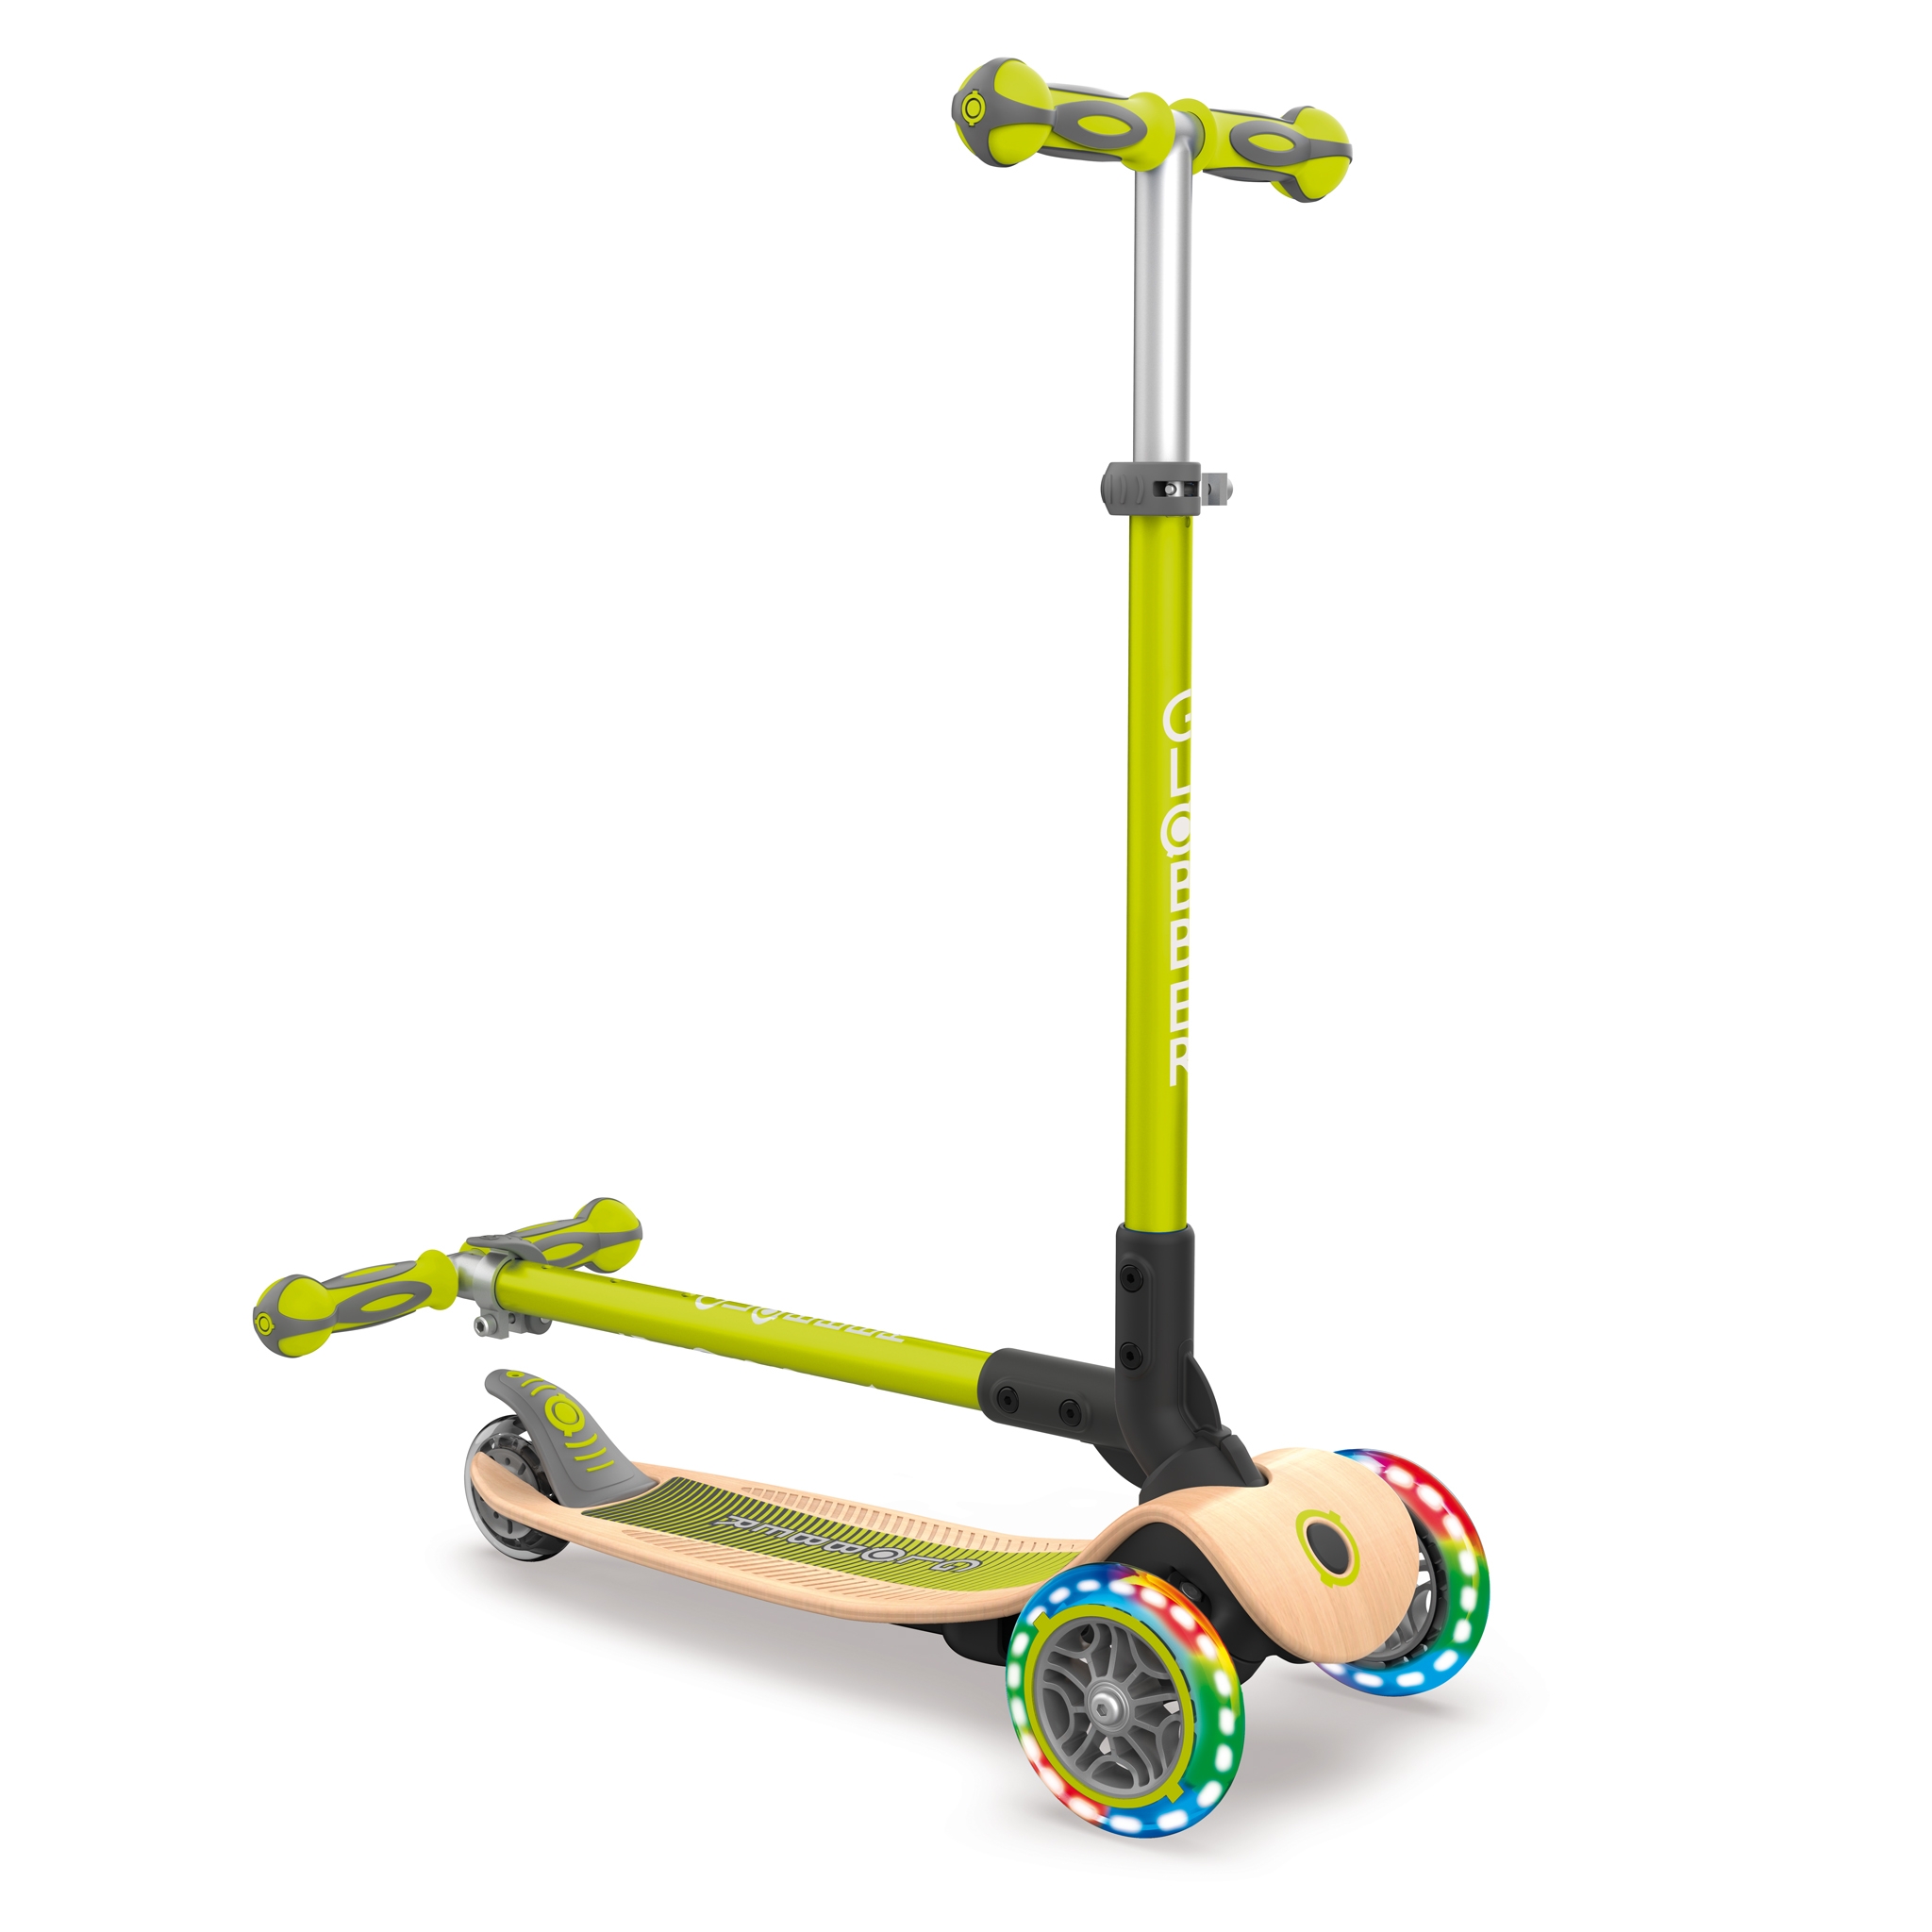 Globber-PRIMO-FOLDABLE-WOOD-LIGHTS-3-wheel-foldable-light-up-scooter-with-7-ply-wooden-scooter-deck-and-light-up-wheels 2